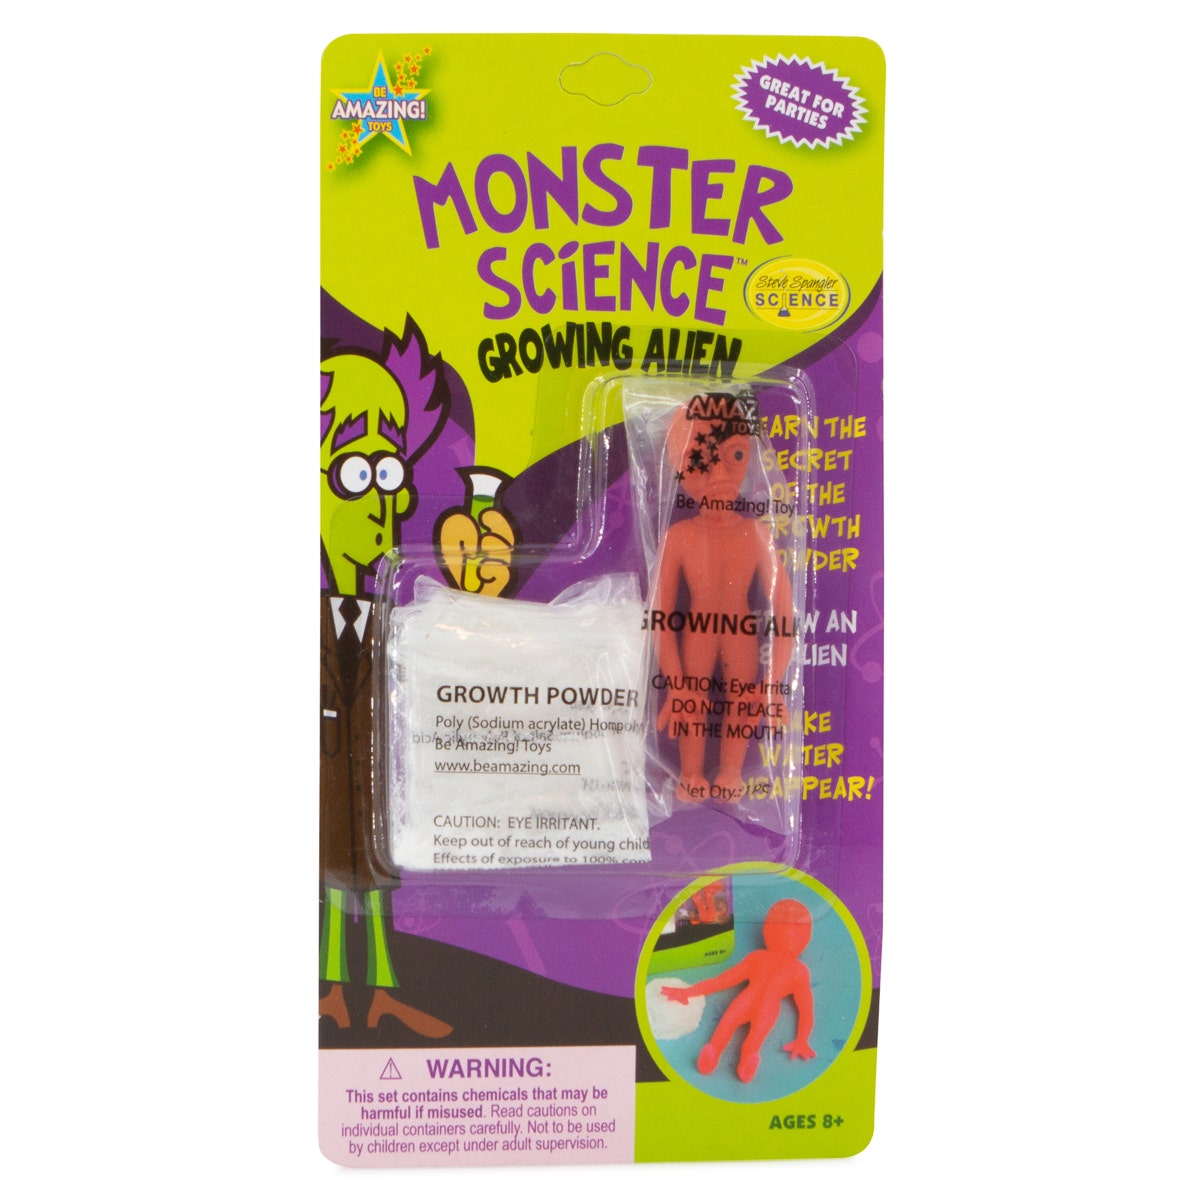 Monster Science Growing Toys – Expandable To Grow In Water!